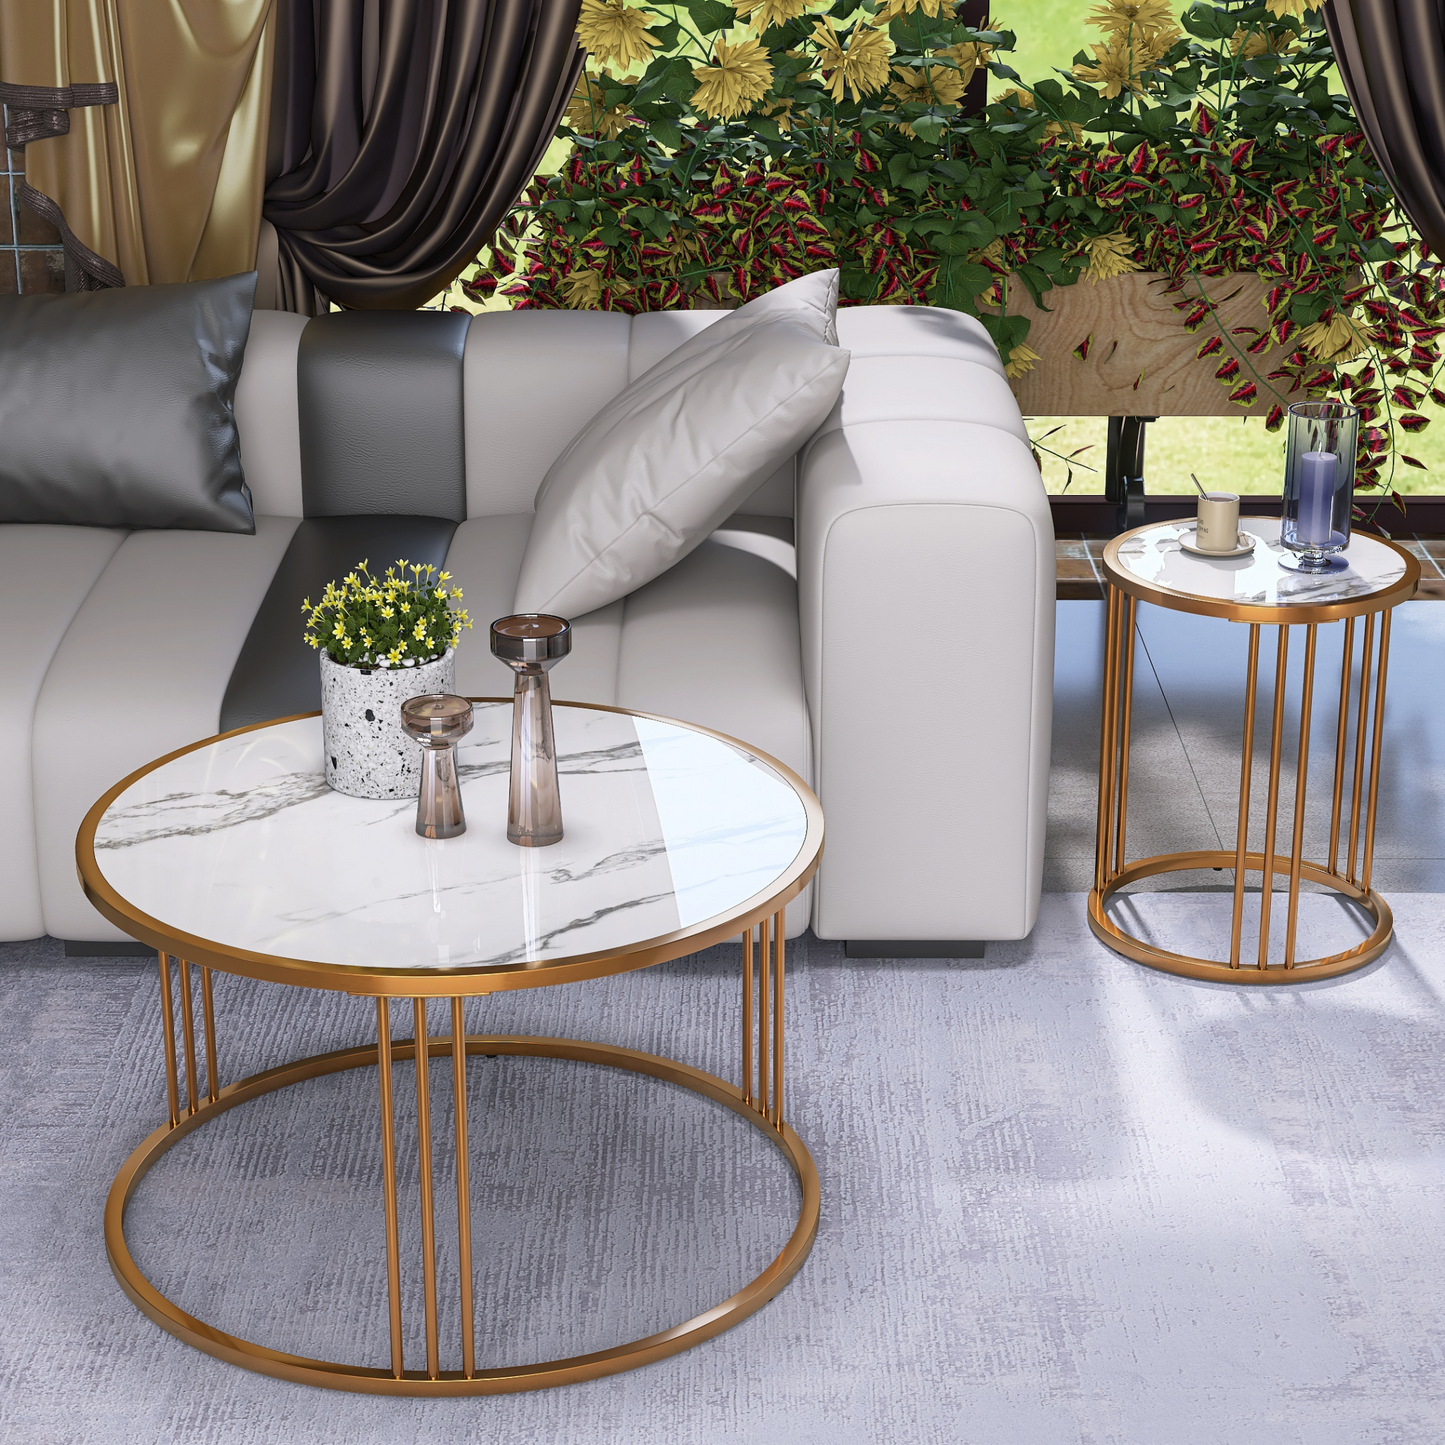 Set of 2 Round Slate Coffee Tables with Steel Frames